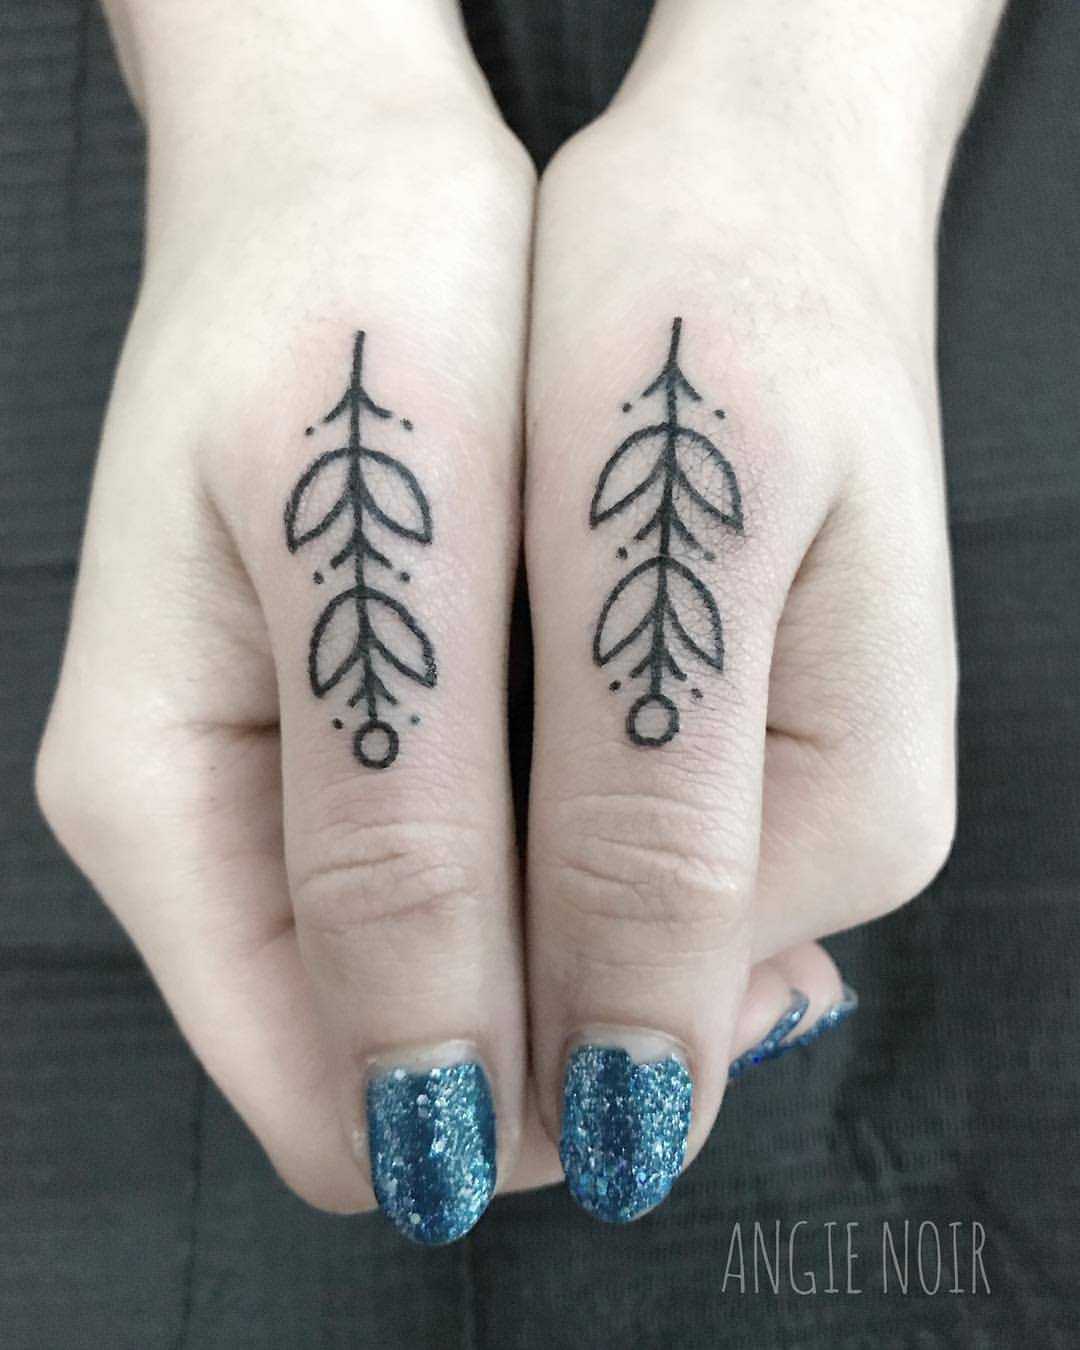 Matching thumb tattoos by Angie Noir